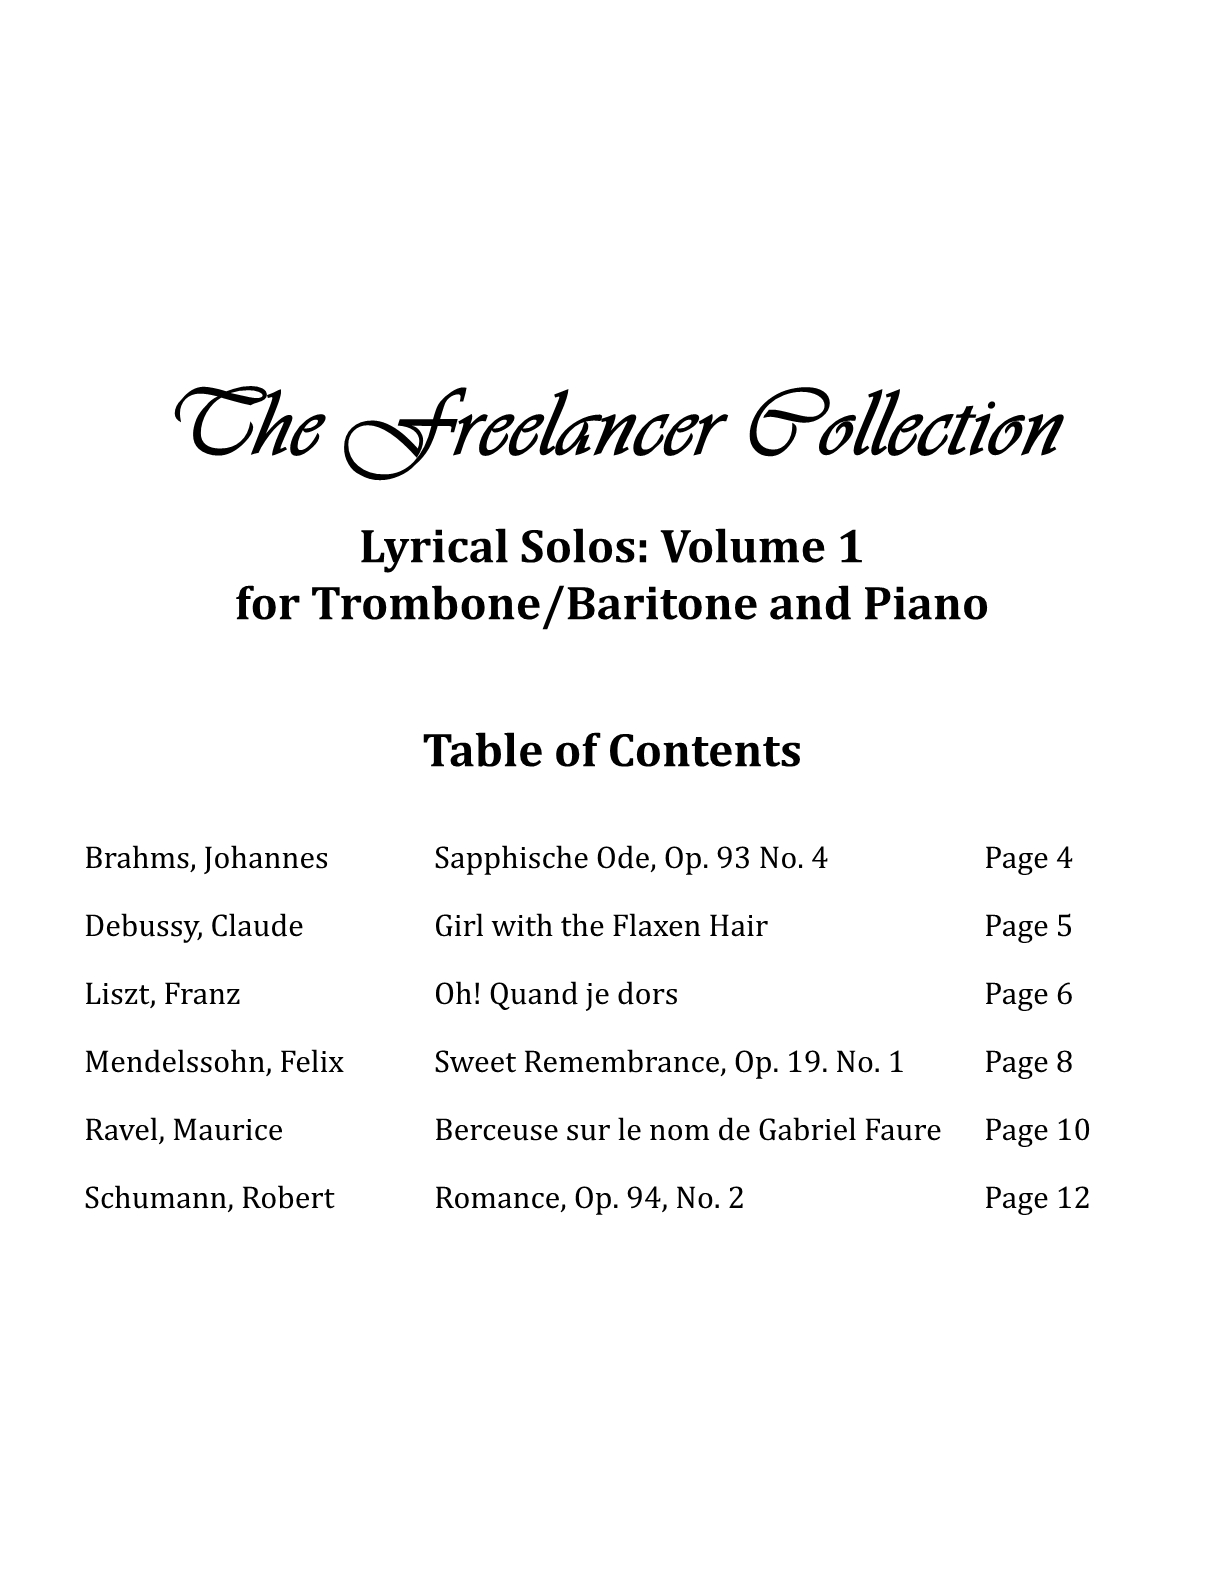 Hepler - Freelancer Collection Lyrical Solos Vol 1 (Trp & Piano) - Click Image to Close